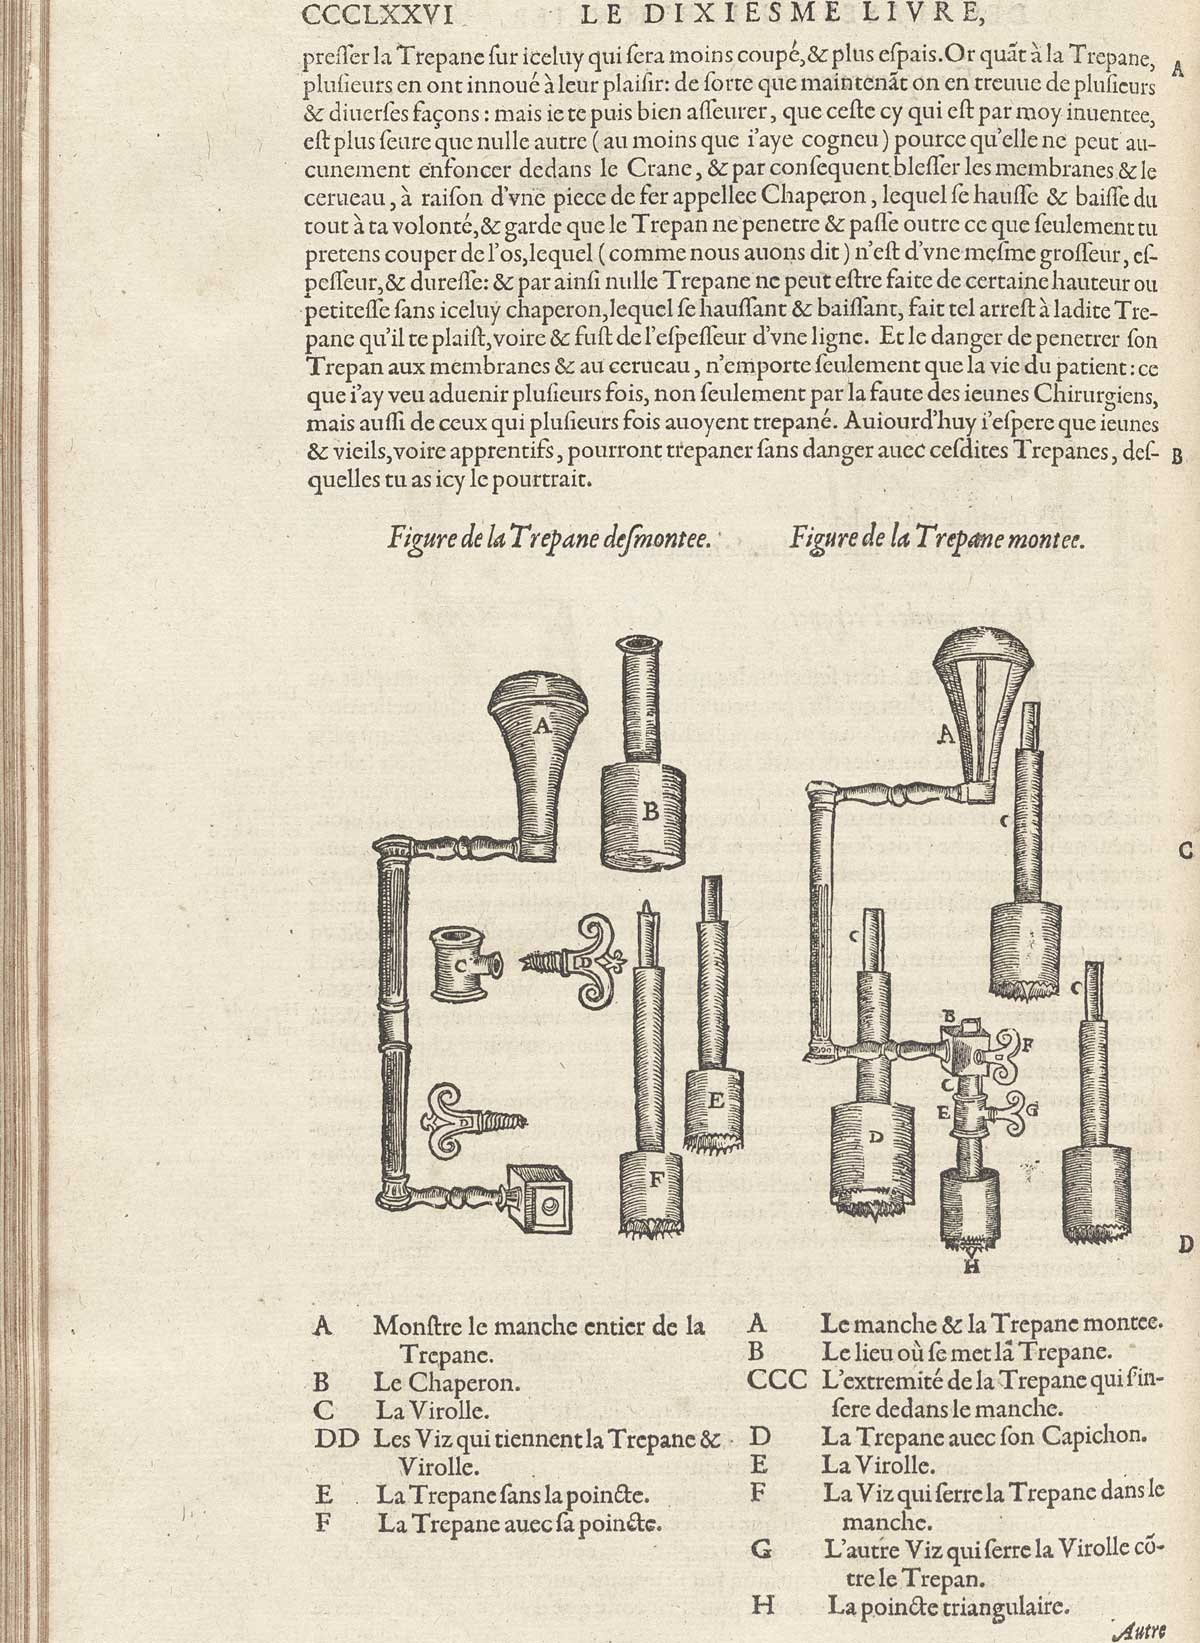 Page CCCLXXVI which features surgical crown saws (Trepane) with descriptive text.